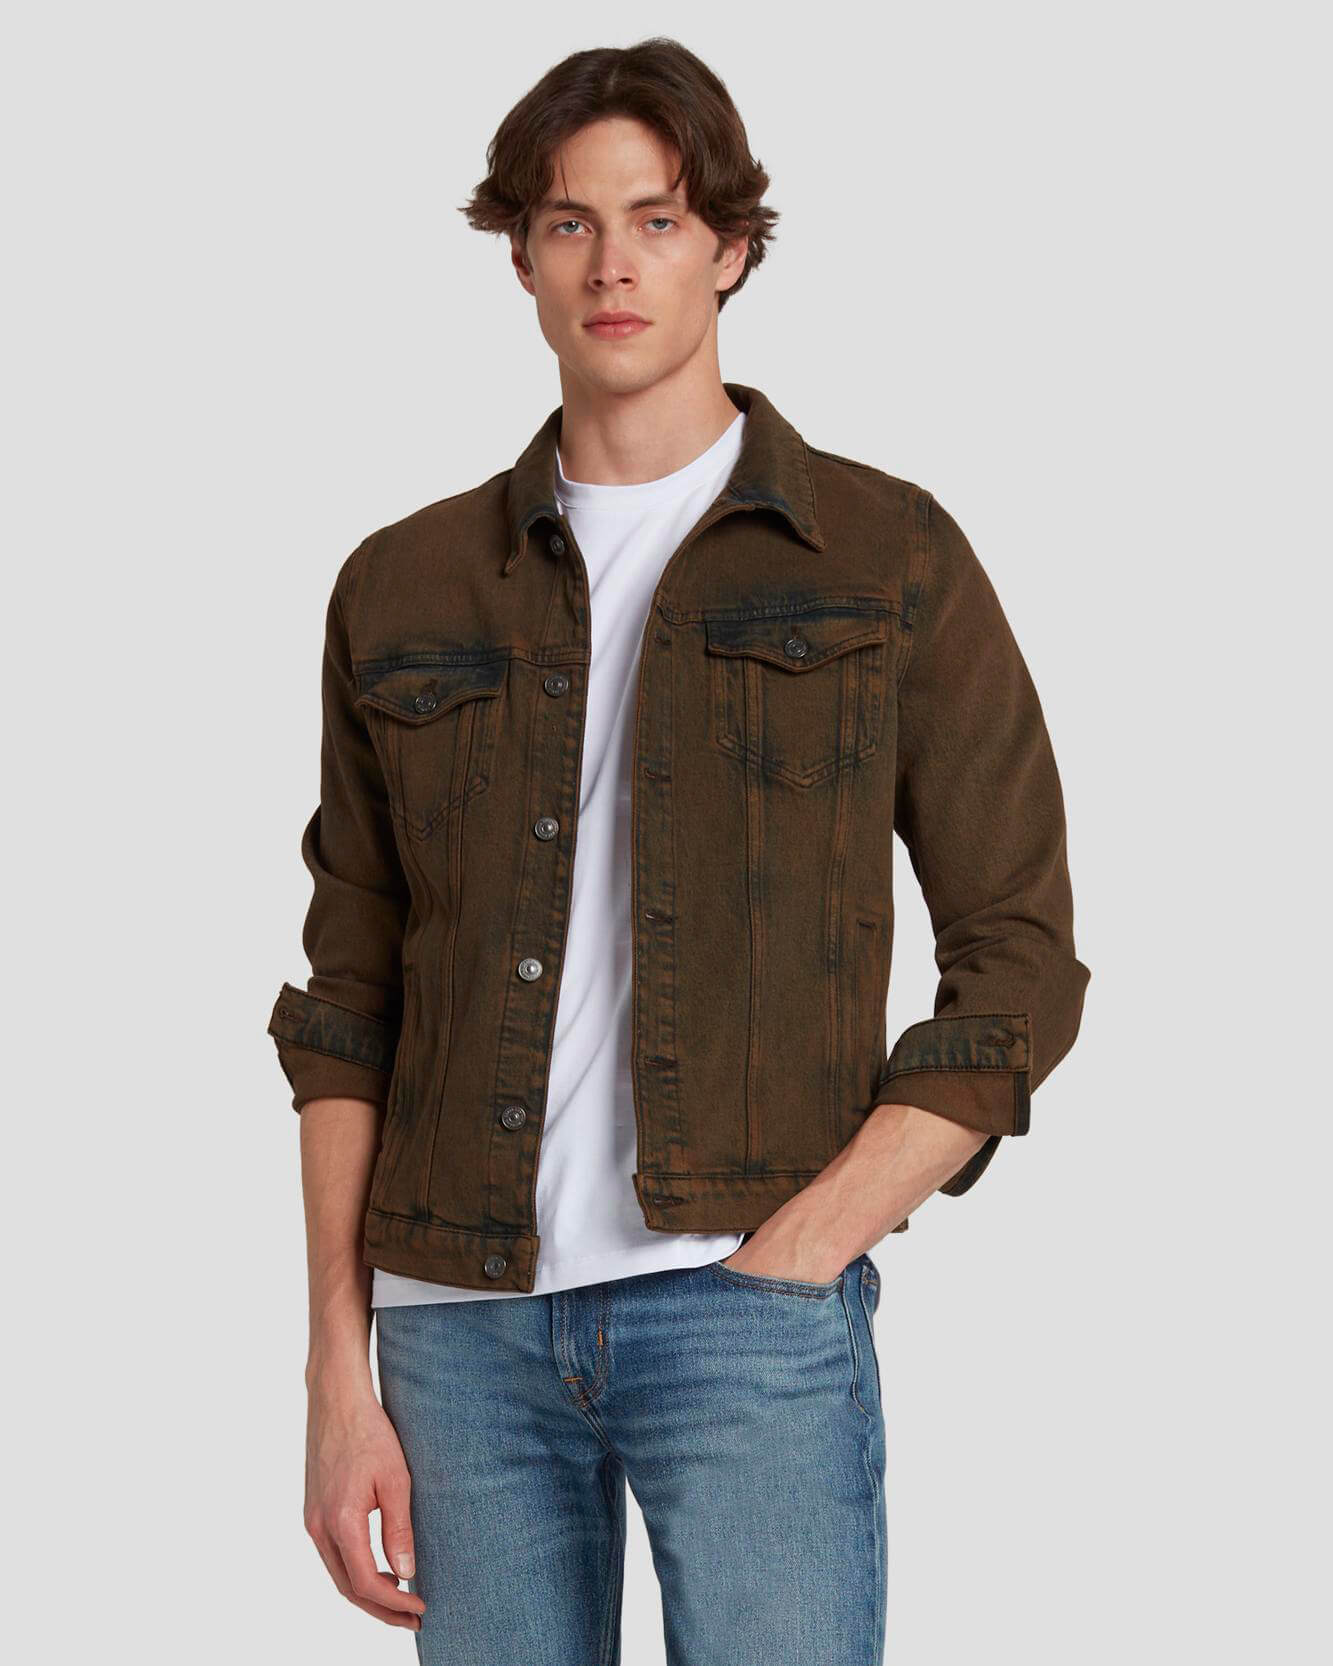 Perfect Trucker Jacket in Figure Out | 7 For All Mankind